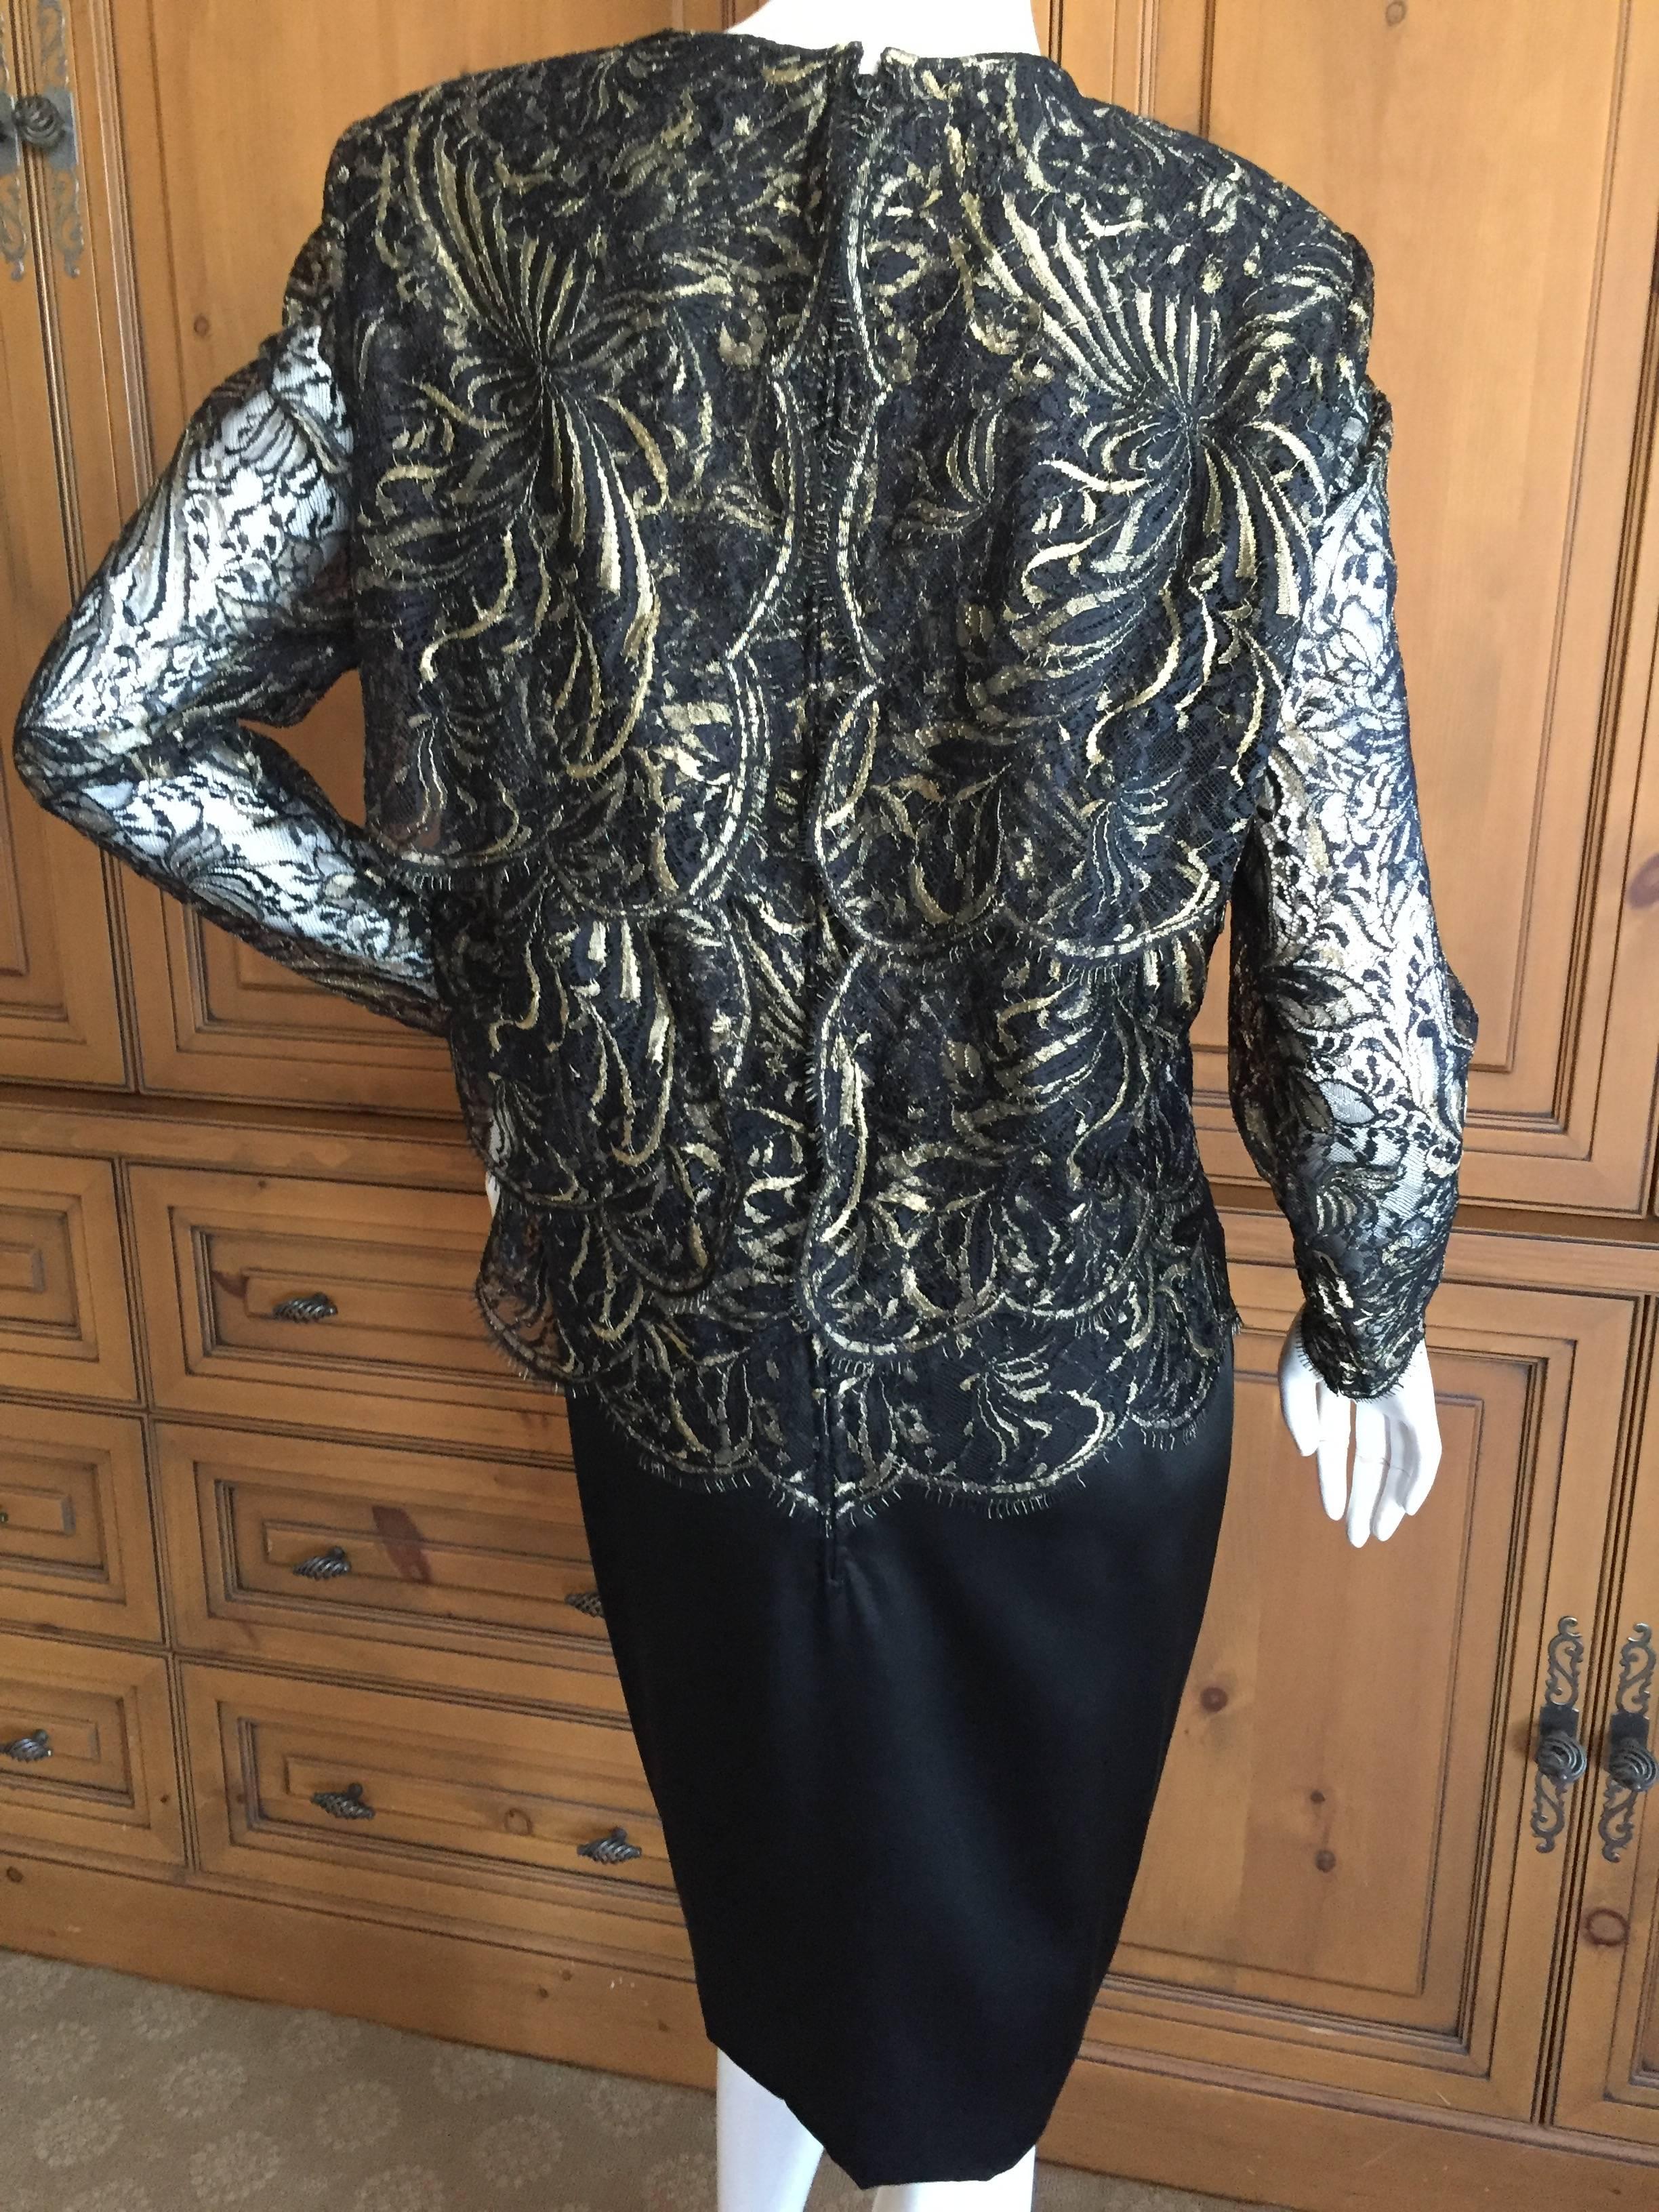 Galanos Tiered Lace Dress with Gold Accents For Sale 2